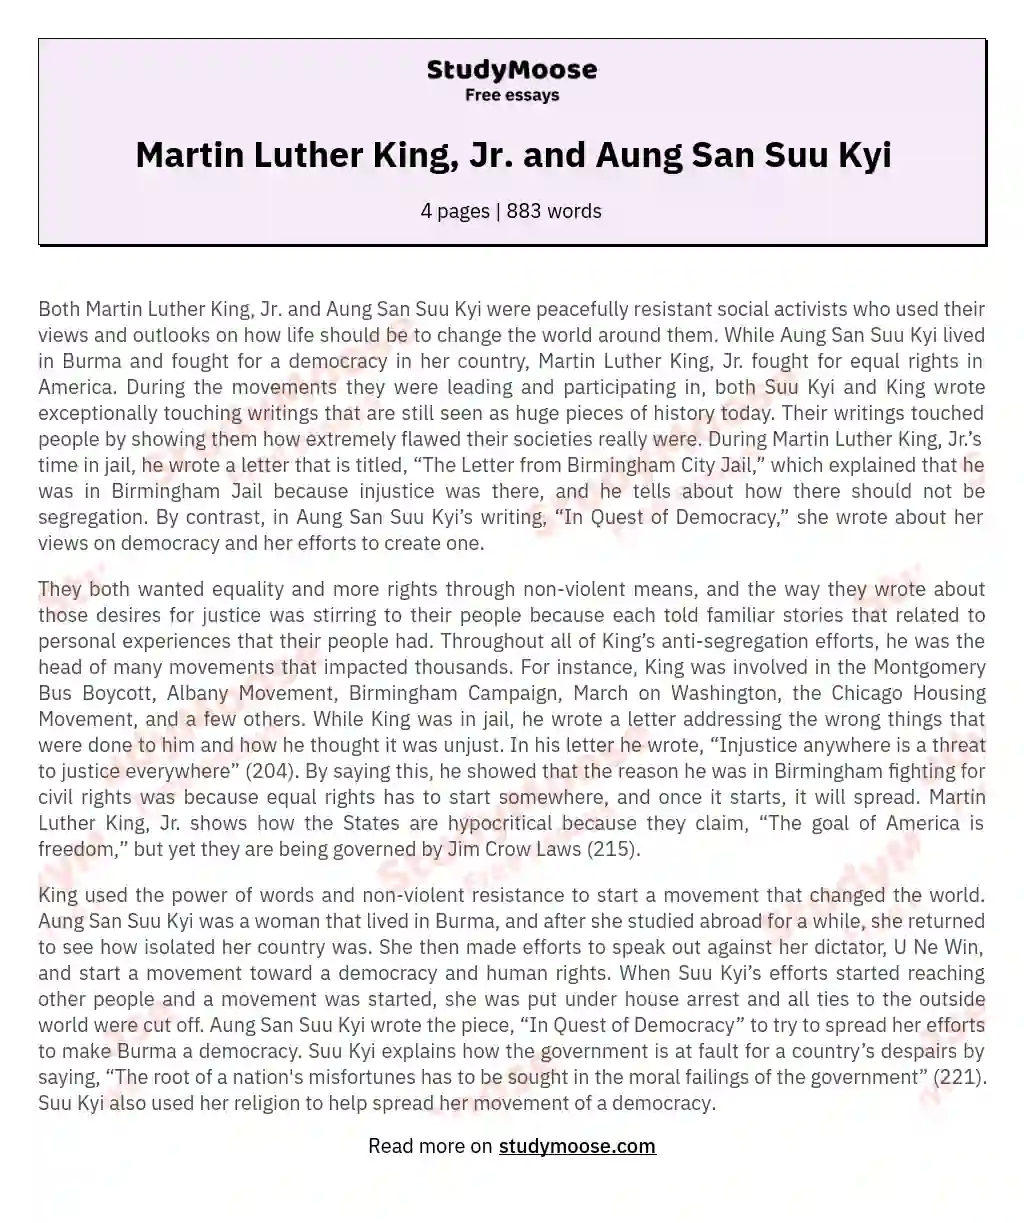 Martin Luther King, Jr. and Aung San Suu Kyi essay